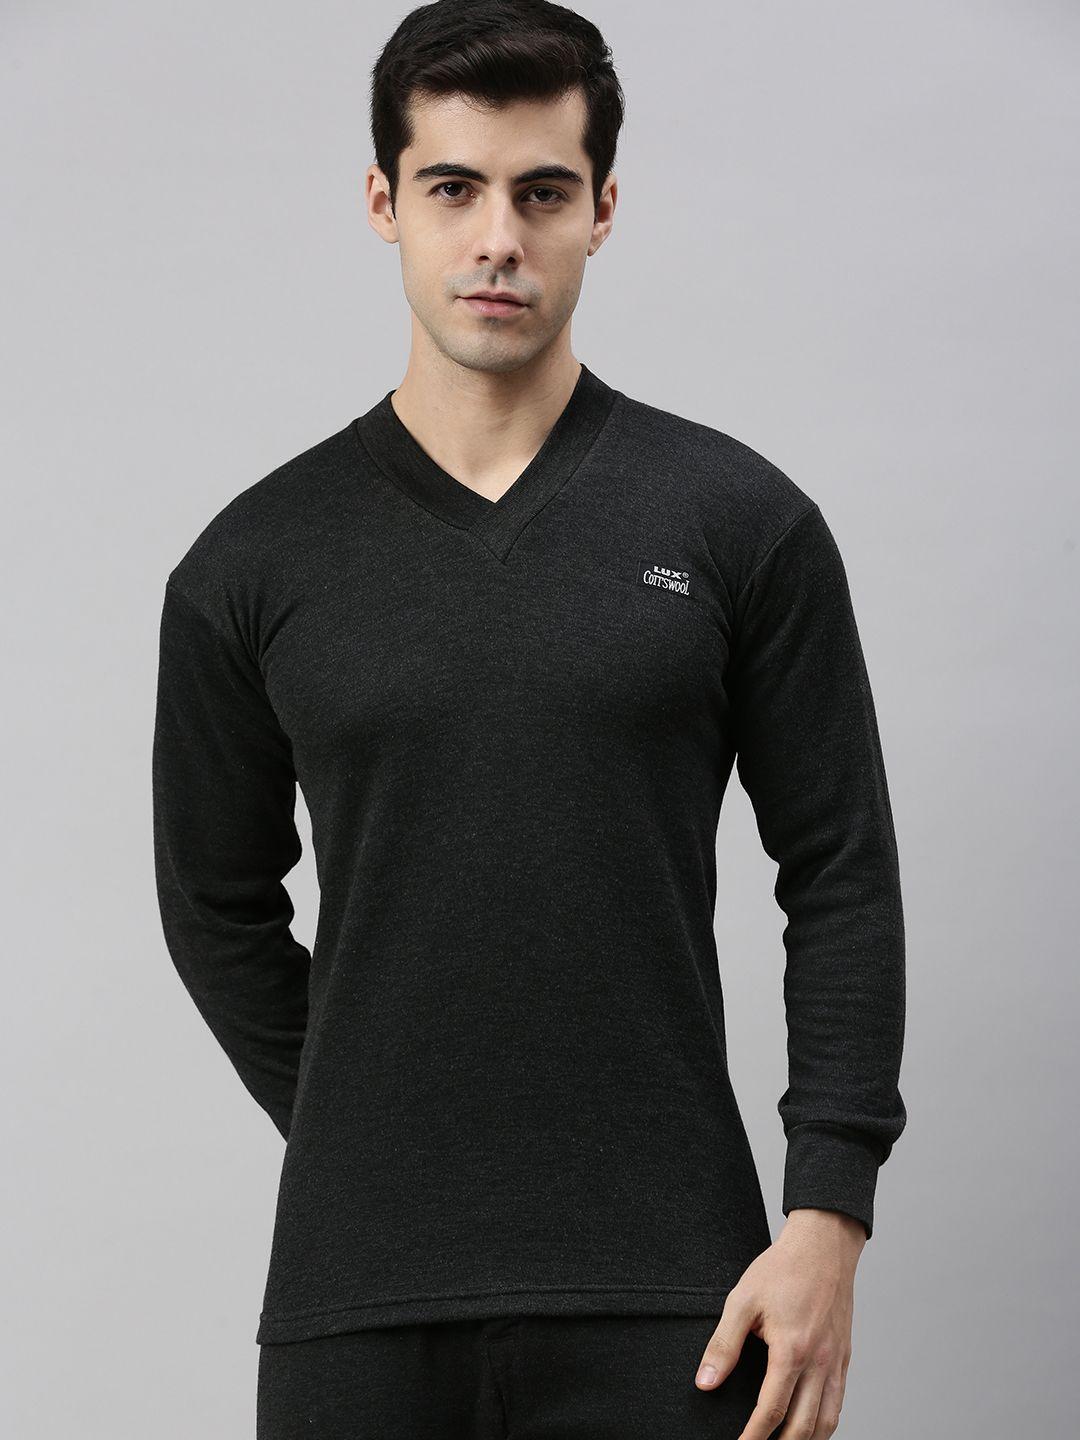 lux cottswool men black solid cotton thermal tops